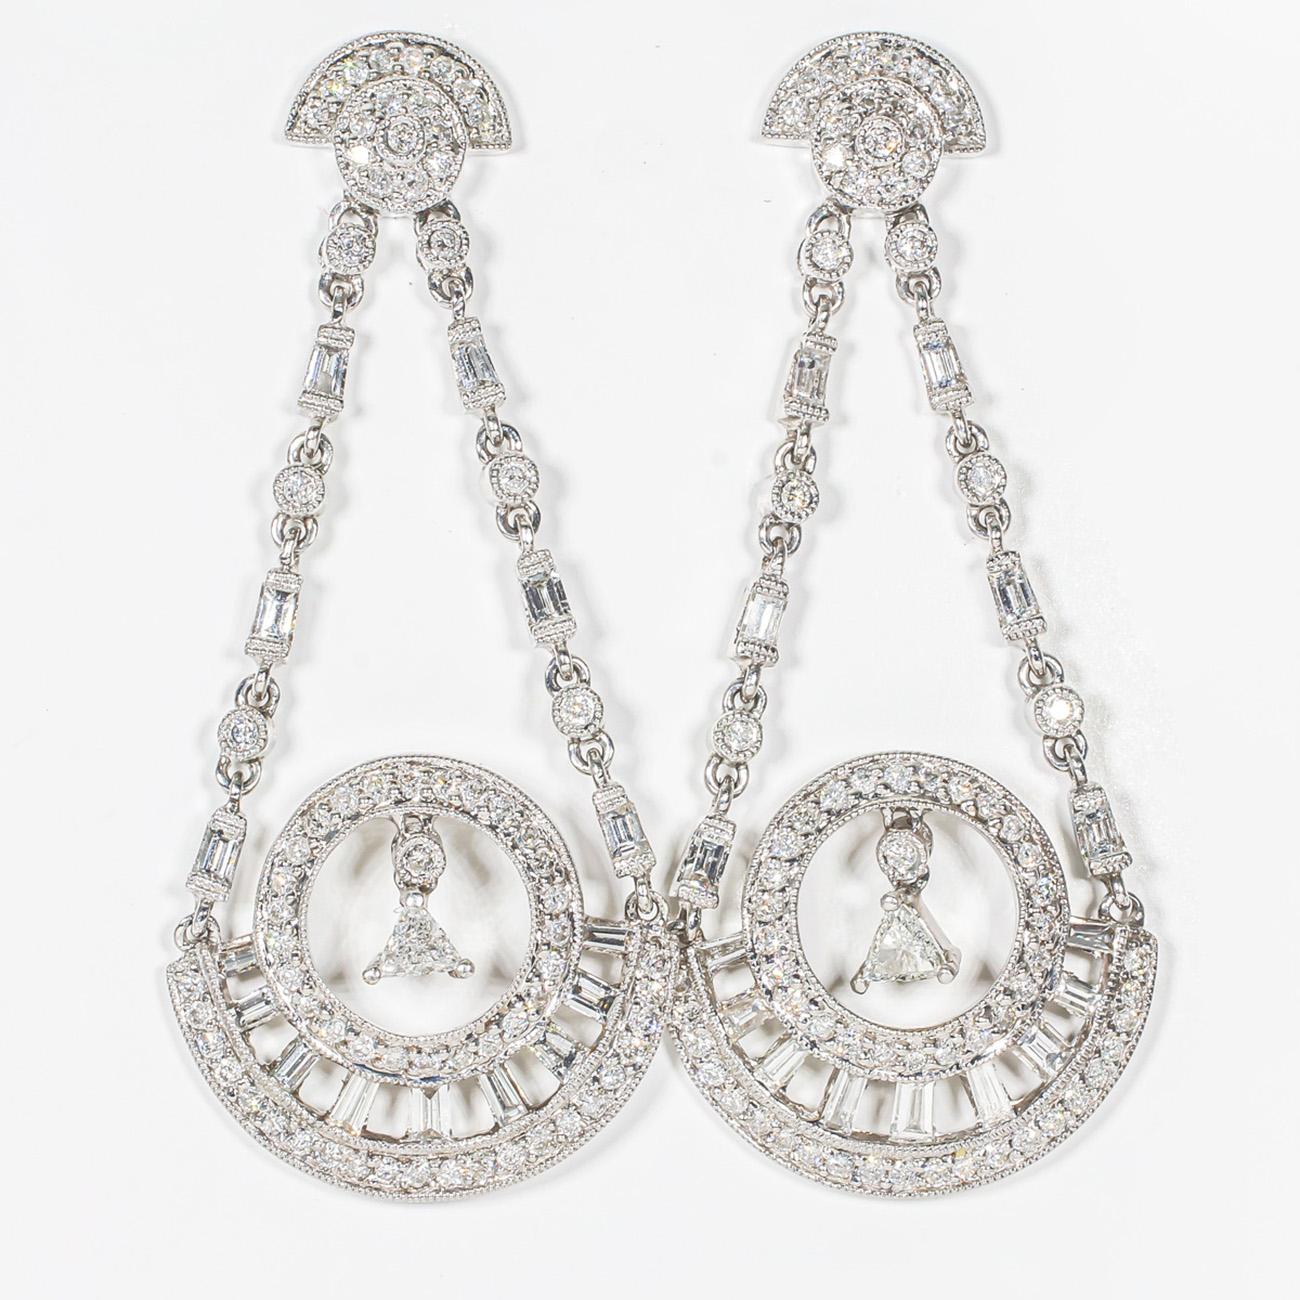 Dangling earrings in white gold with channel set baguettes, pave and bezel set rounds, and prong set trilliant cut diamonds.  D2.25ct.t.w.